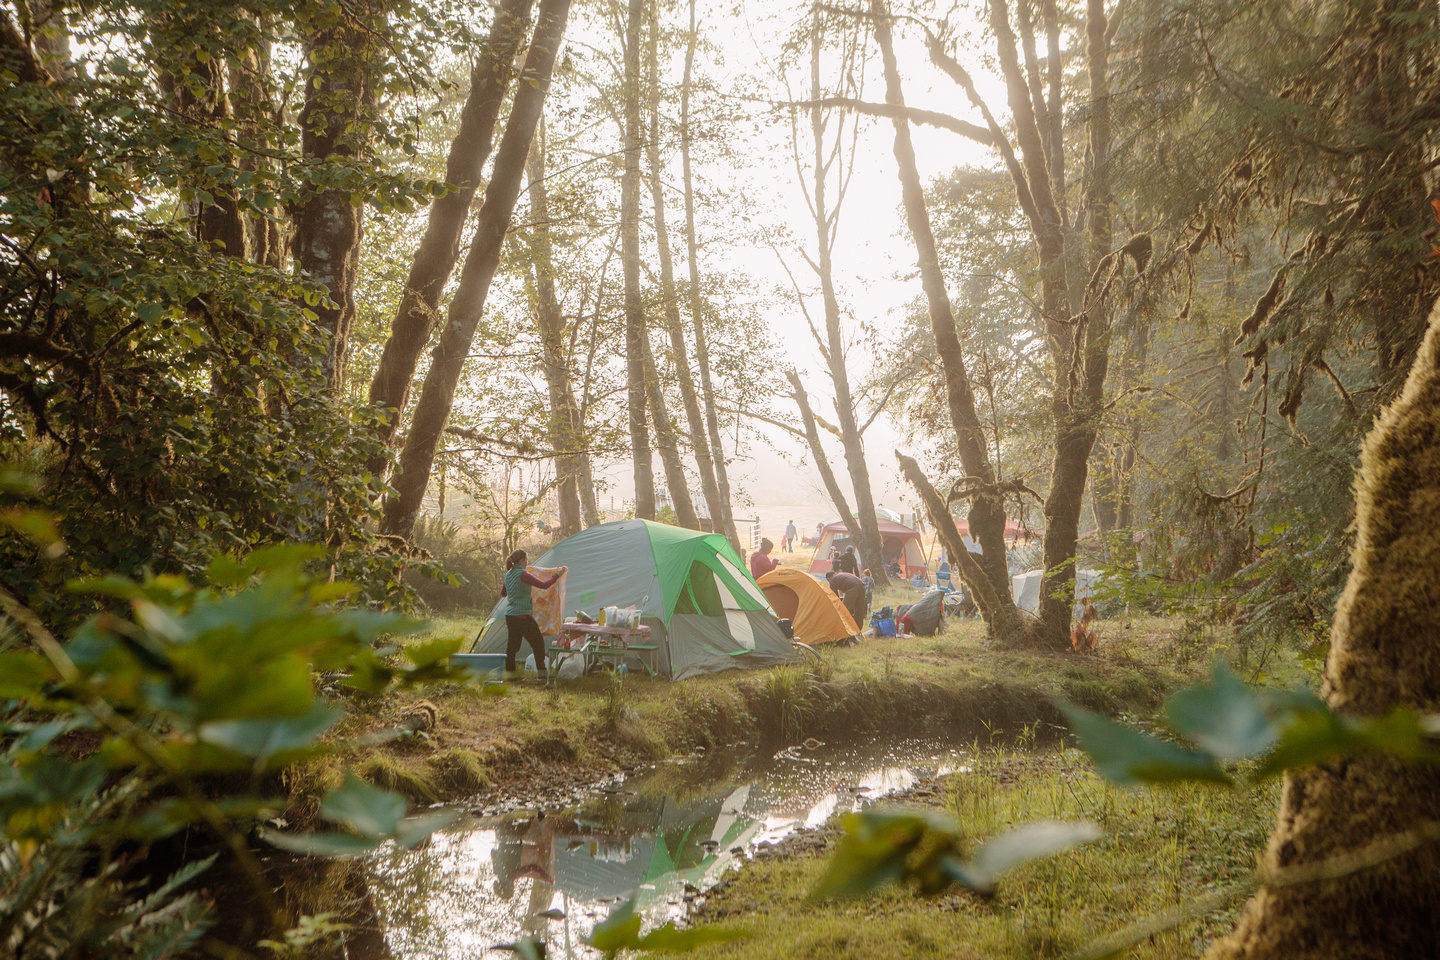 Things to Know for Your First Camping Trip by Lisa Boness for Hike it Baby